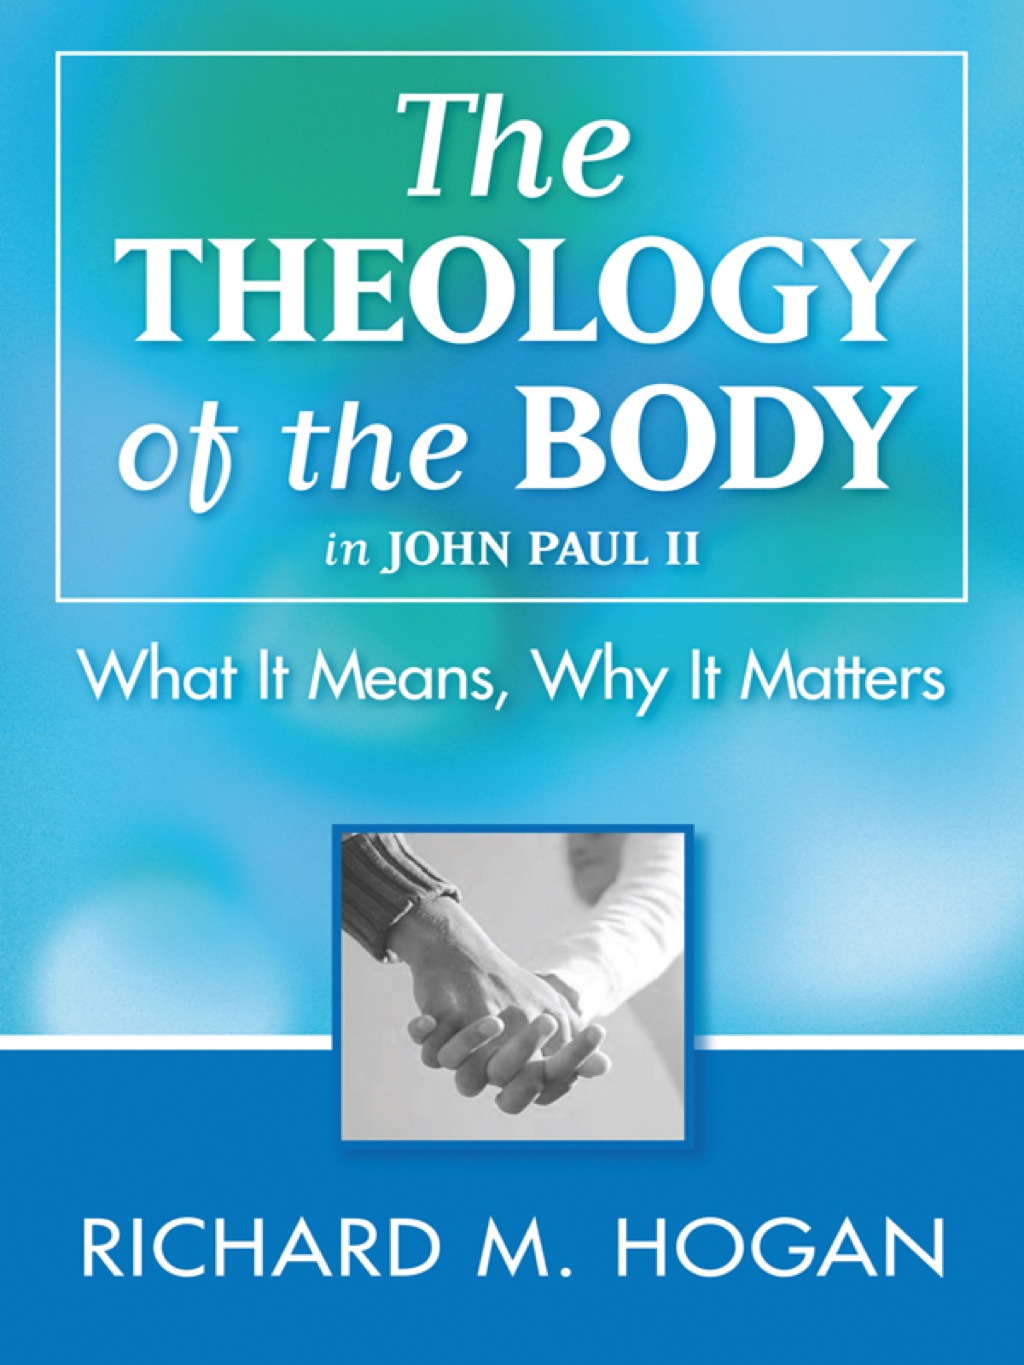 The Theology of the Body: What it Means and Why It Matters in John Paul II (eBook) - Richard M. Hogan,